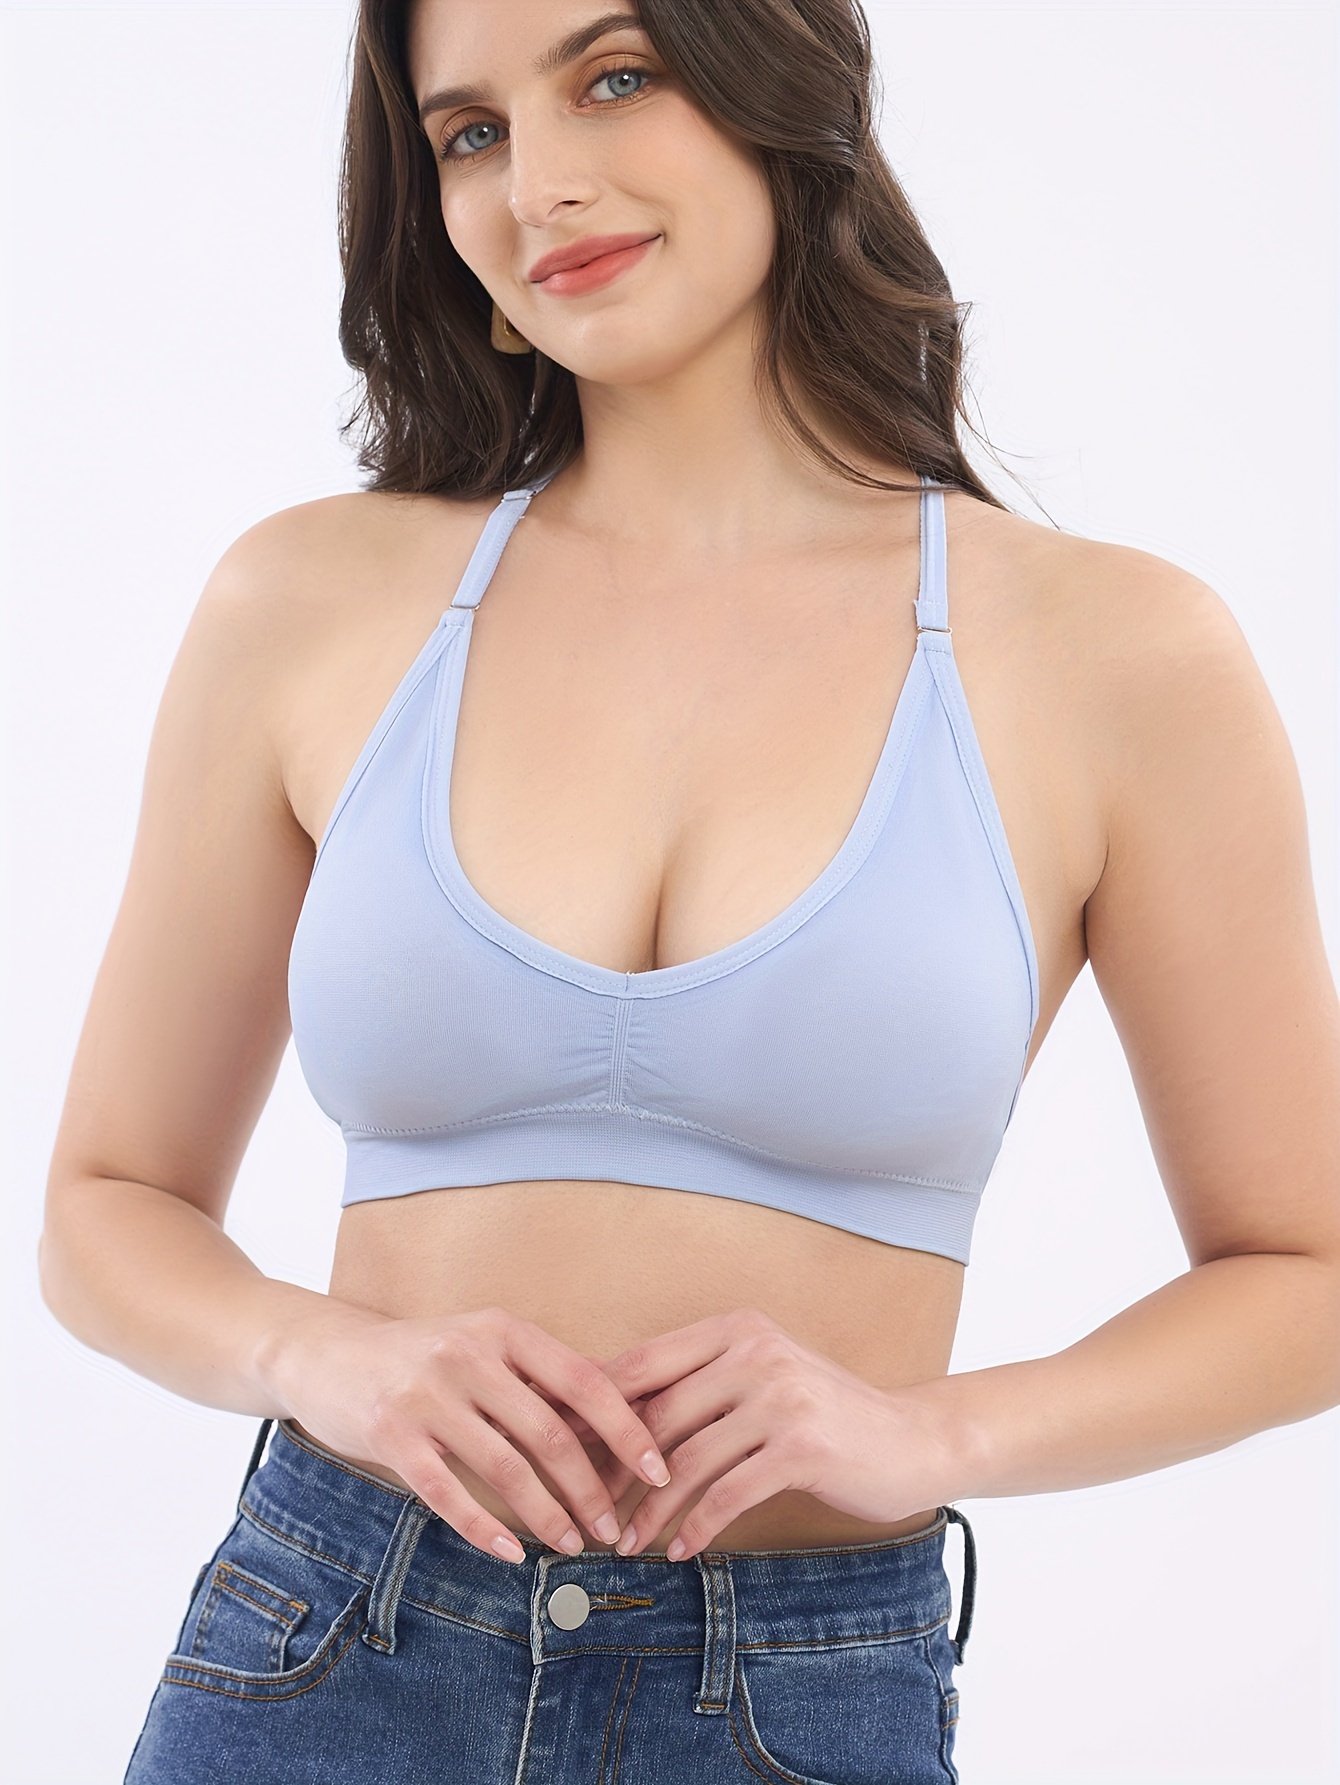 Women's Comfortable Traceless Sports Bra with Ruffles for